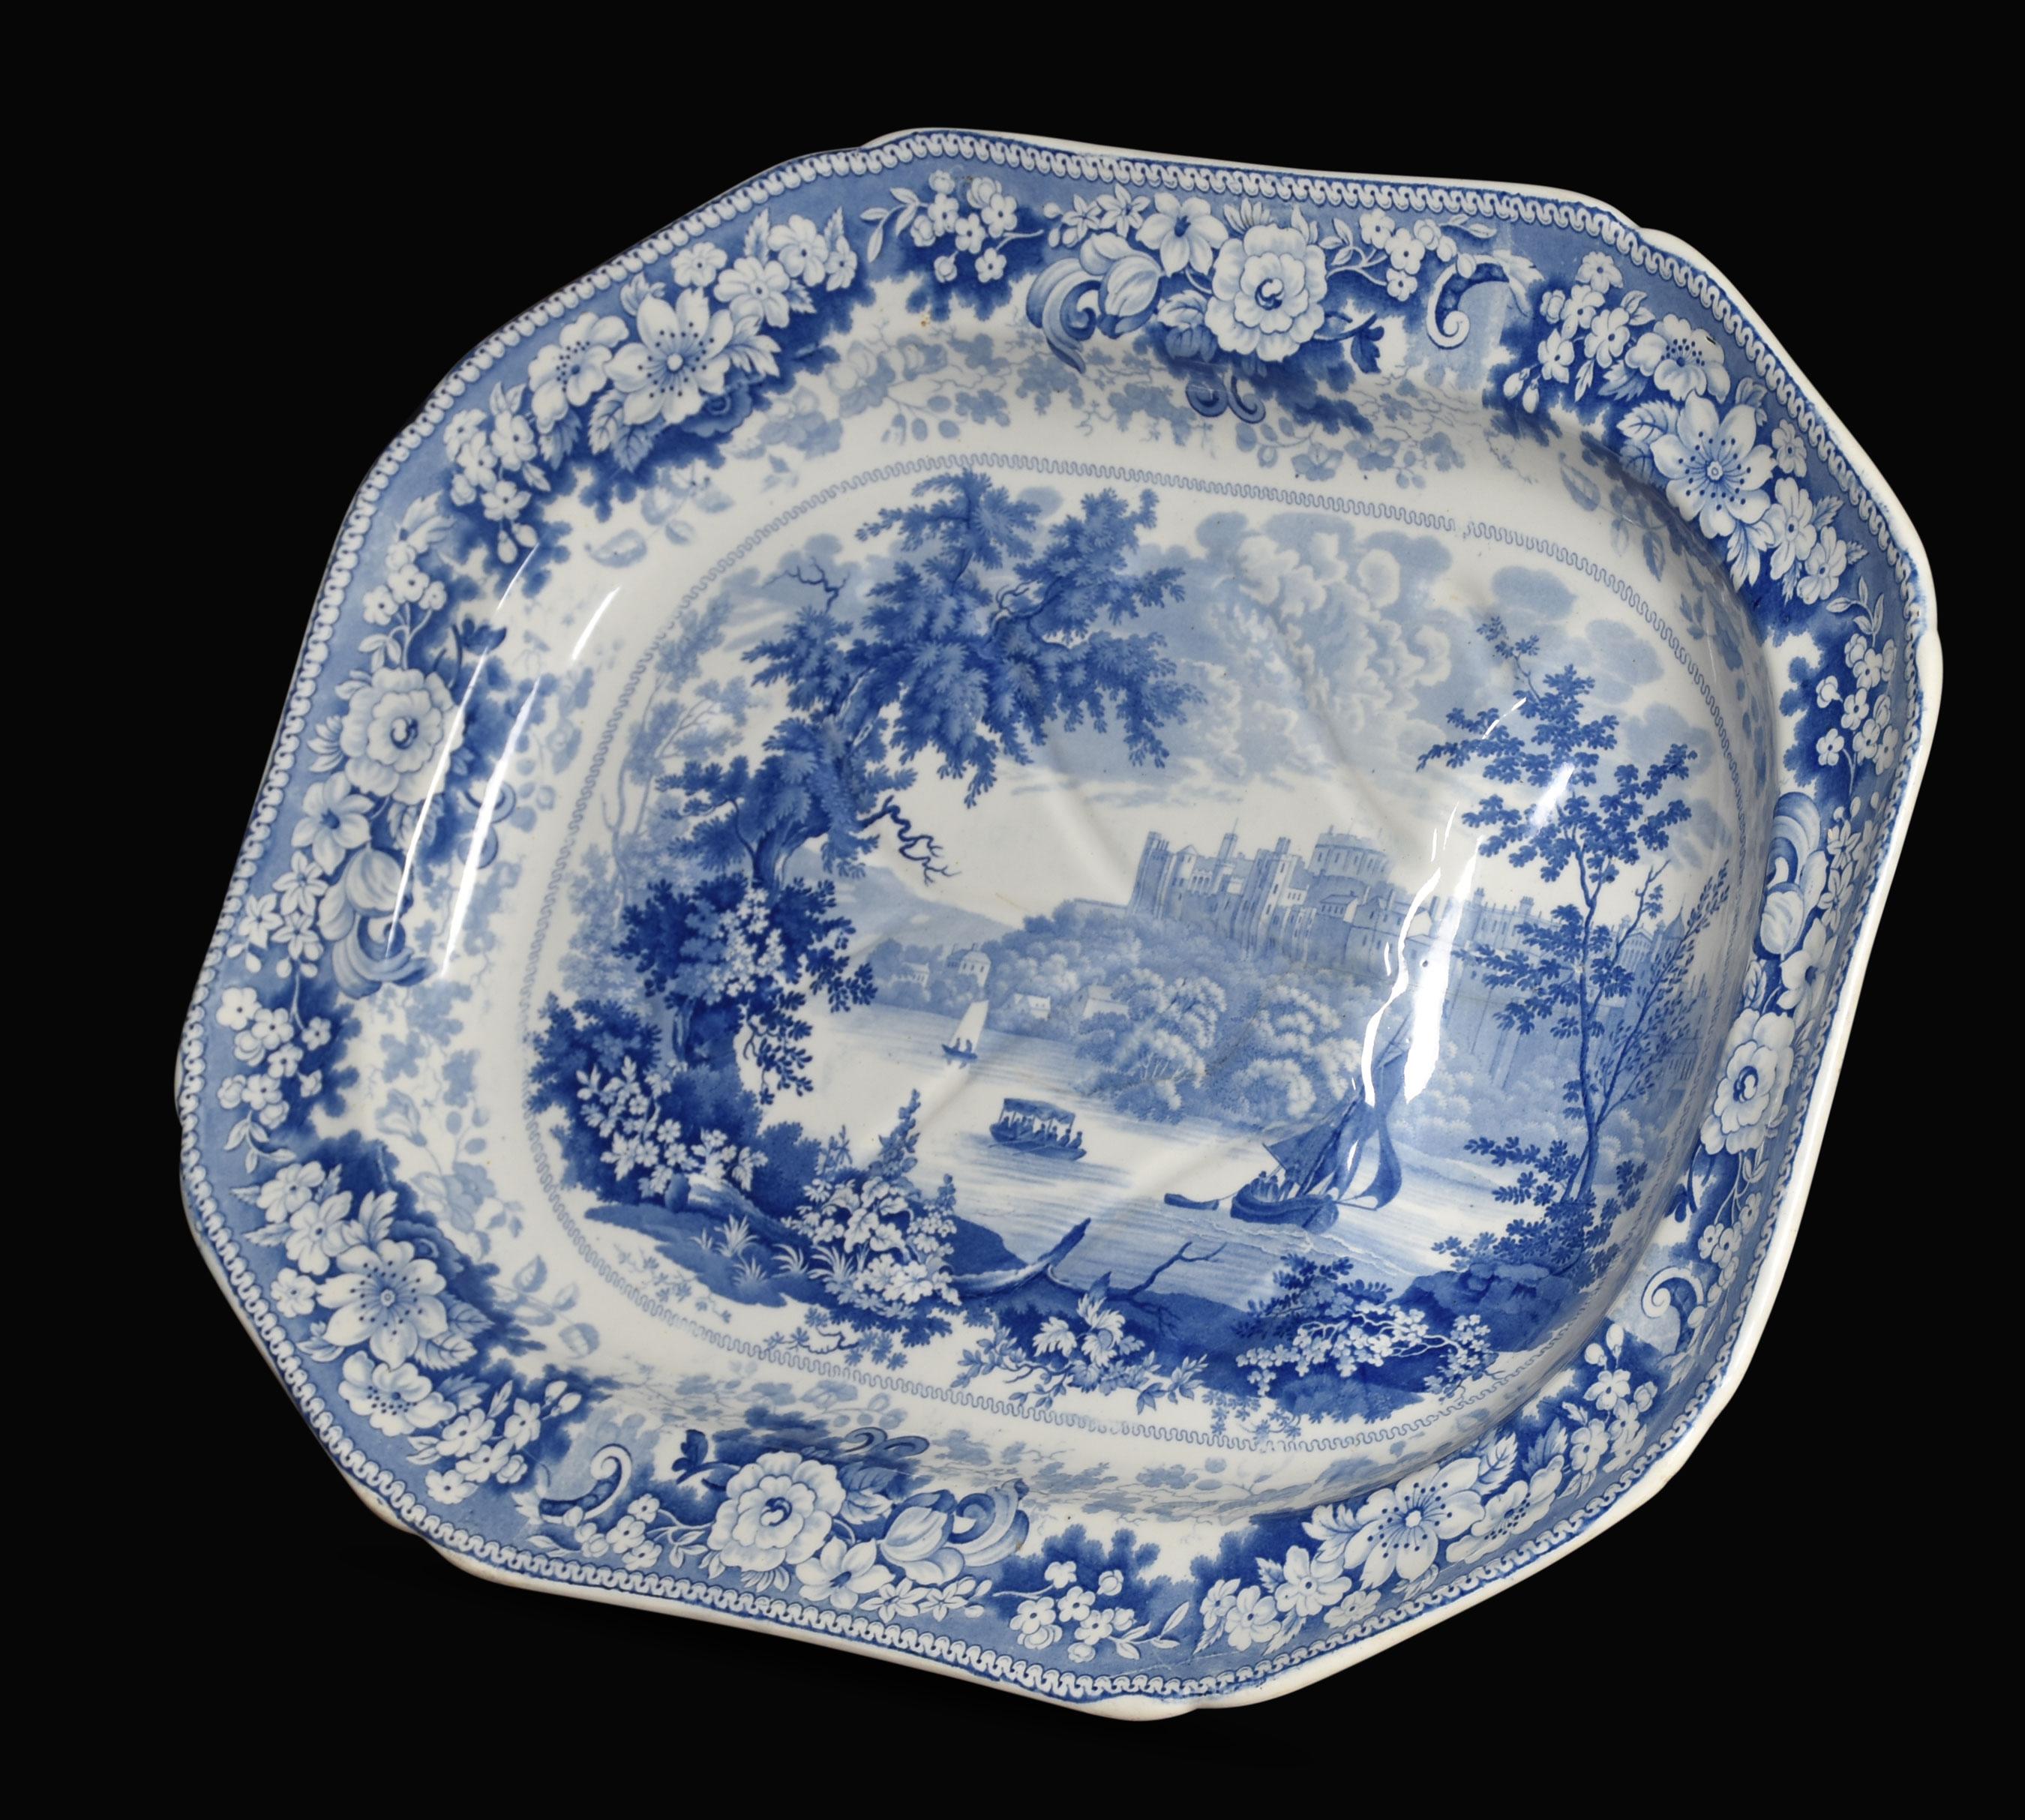 Staffordshire 19th century blue and white meat draining plate depicting British scenery pattern.
Dimensions
Height 3 inches
Width 20.5 inches
Depth 16 inches.